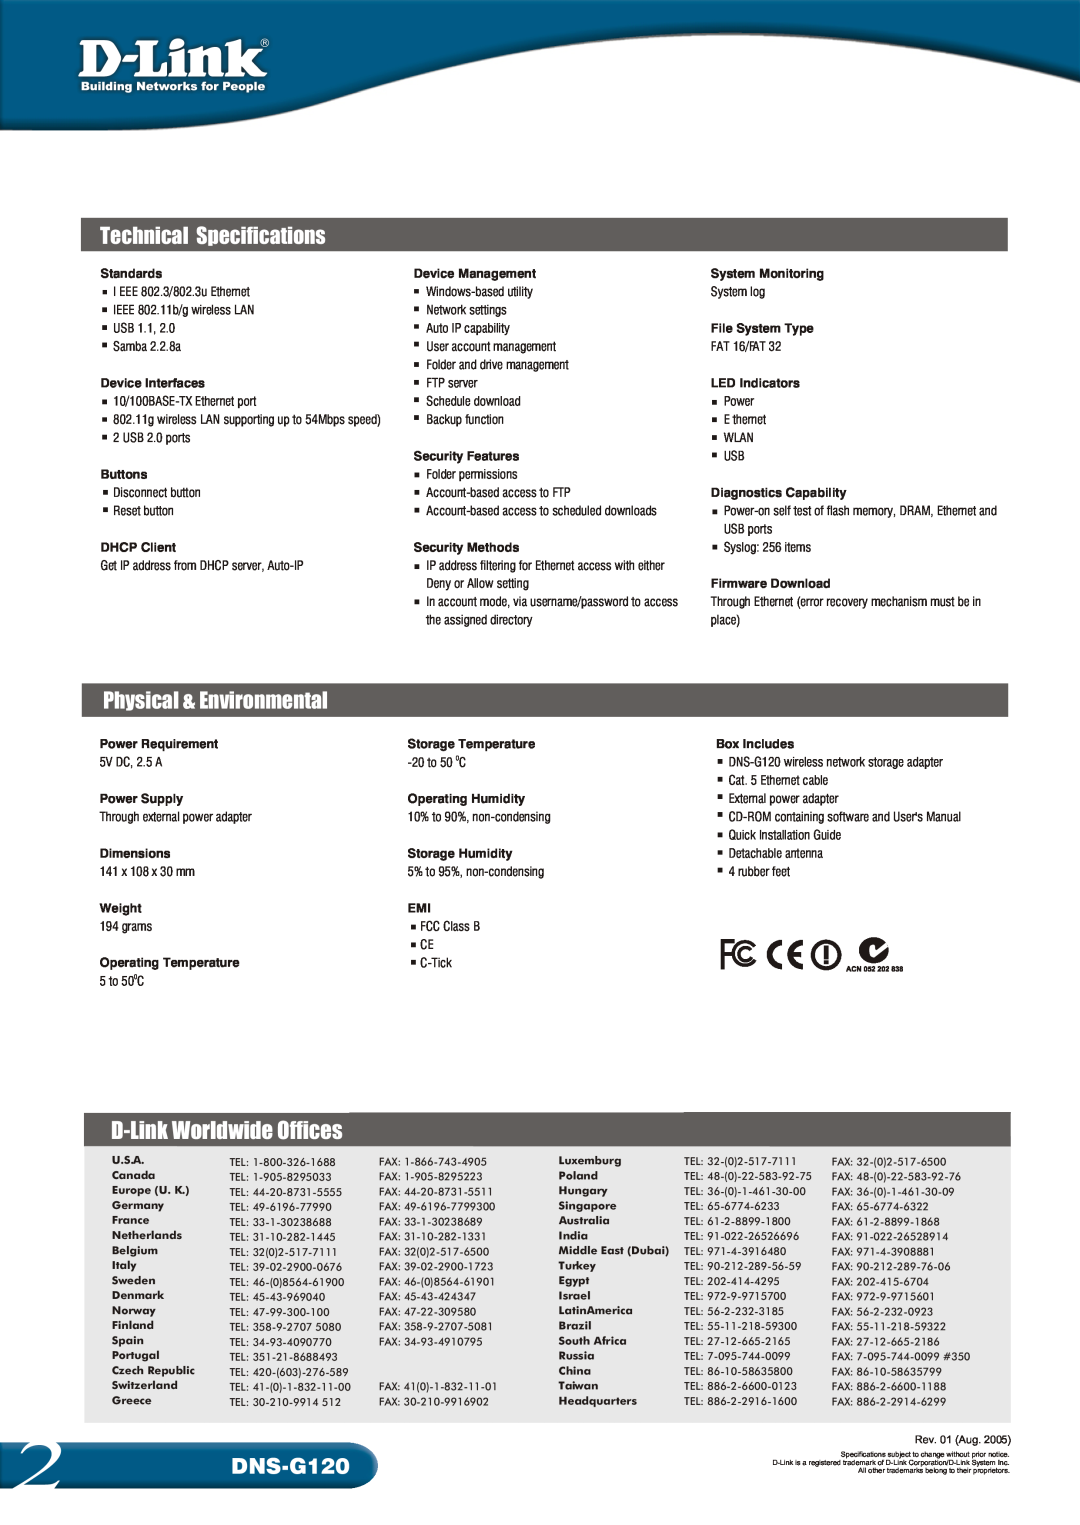 D-Link DNS-G120 manual D-Link Worldwide Offices, Technical Specifications, Physical & Environmental 